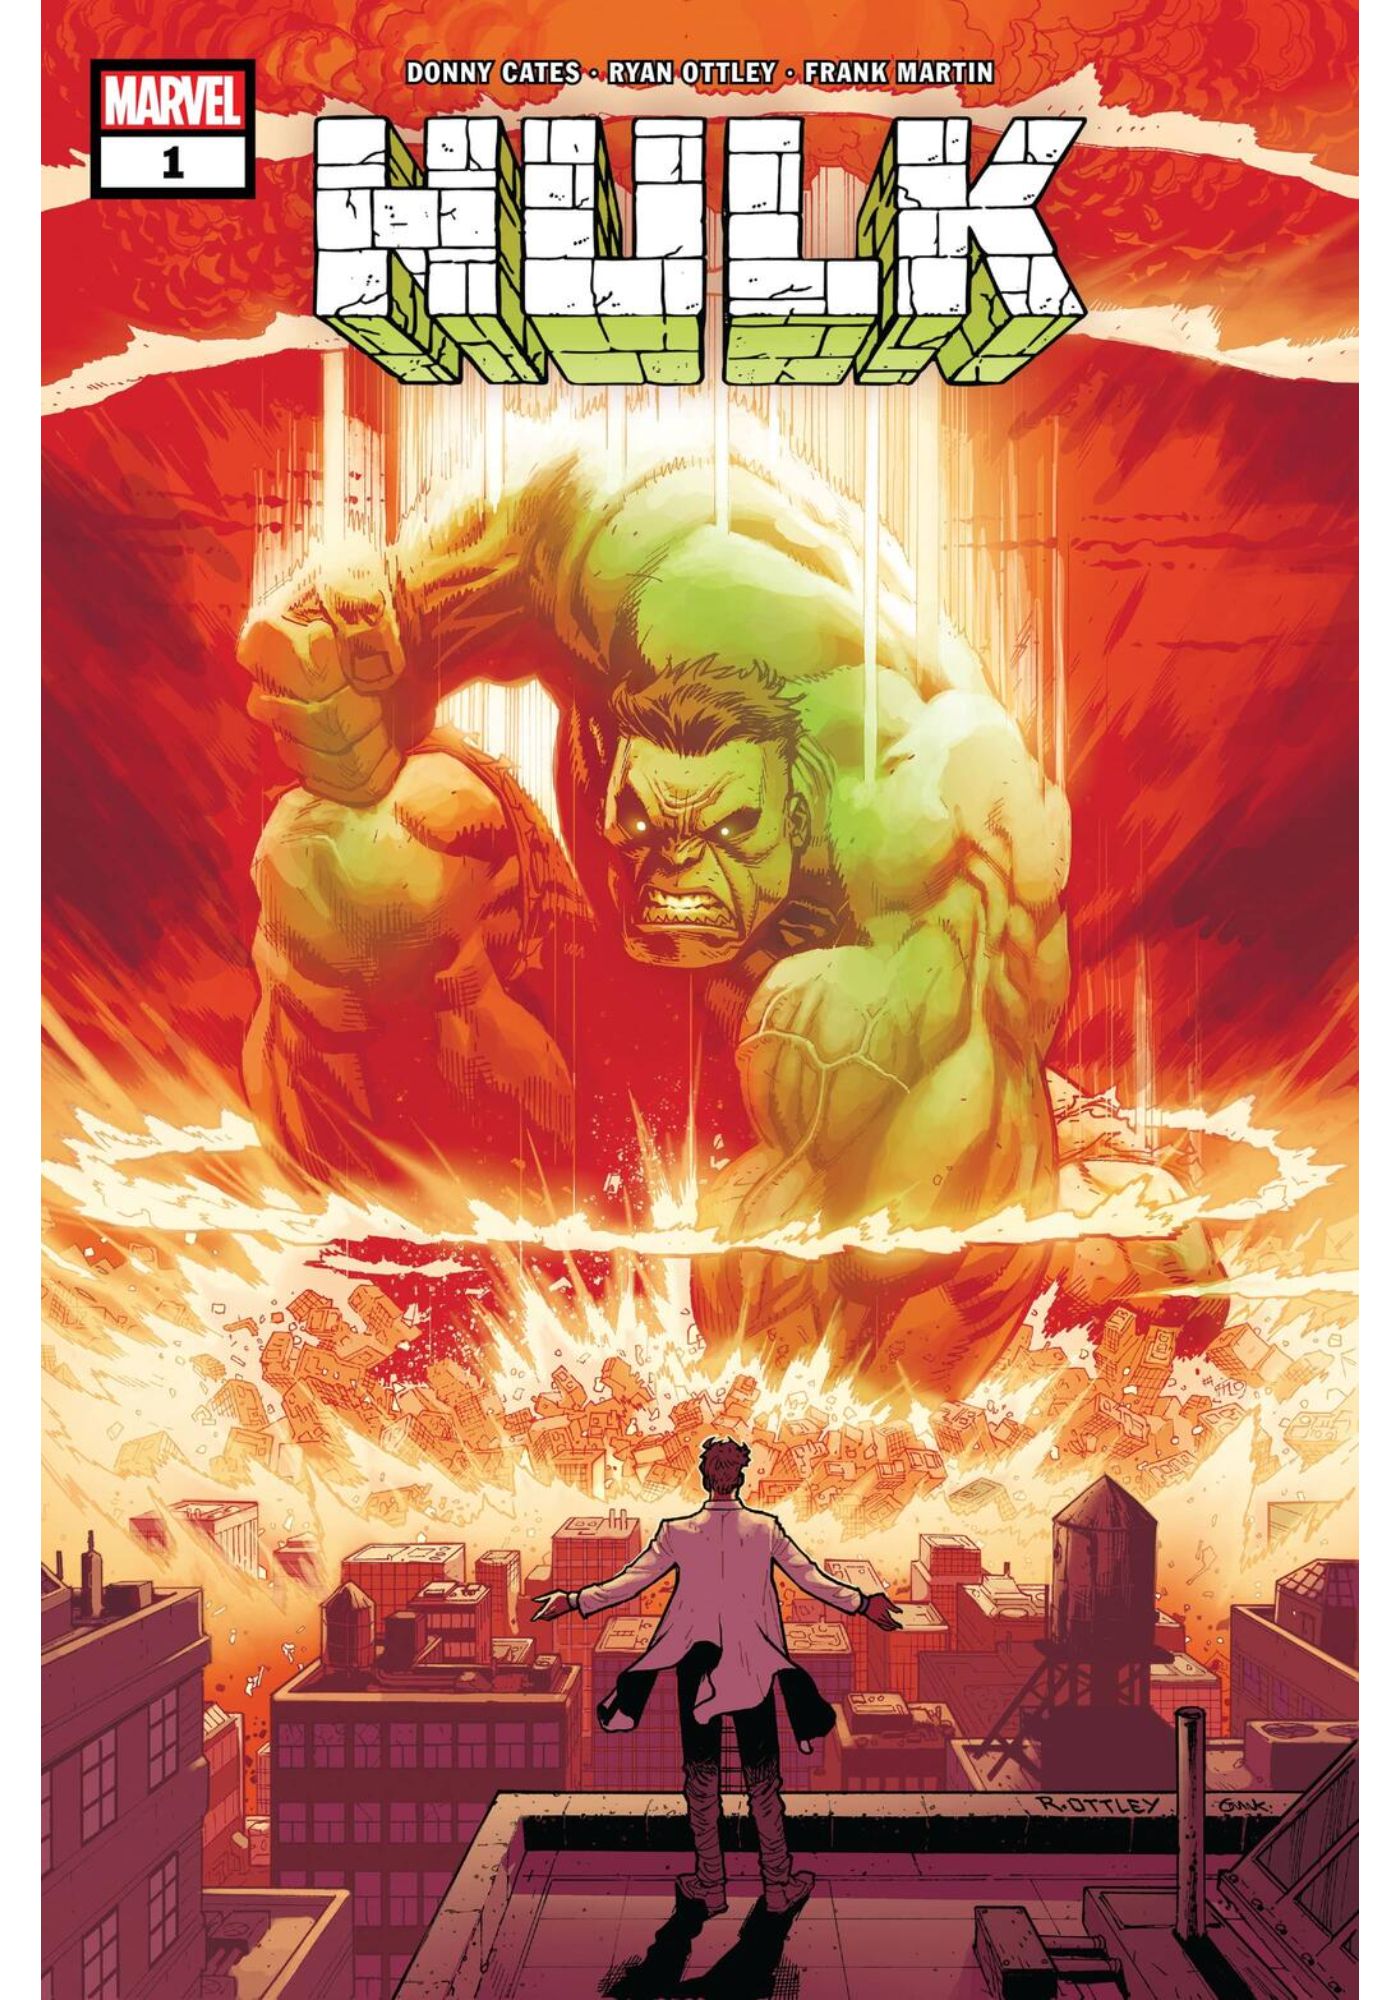 Hulk’s Rage Is About To Reach An All-Time High